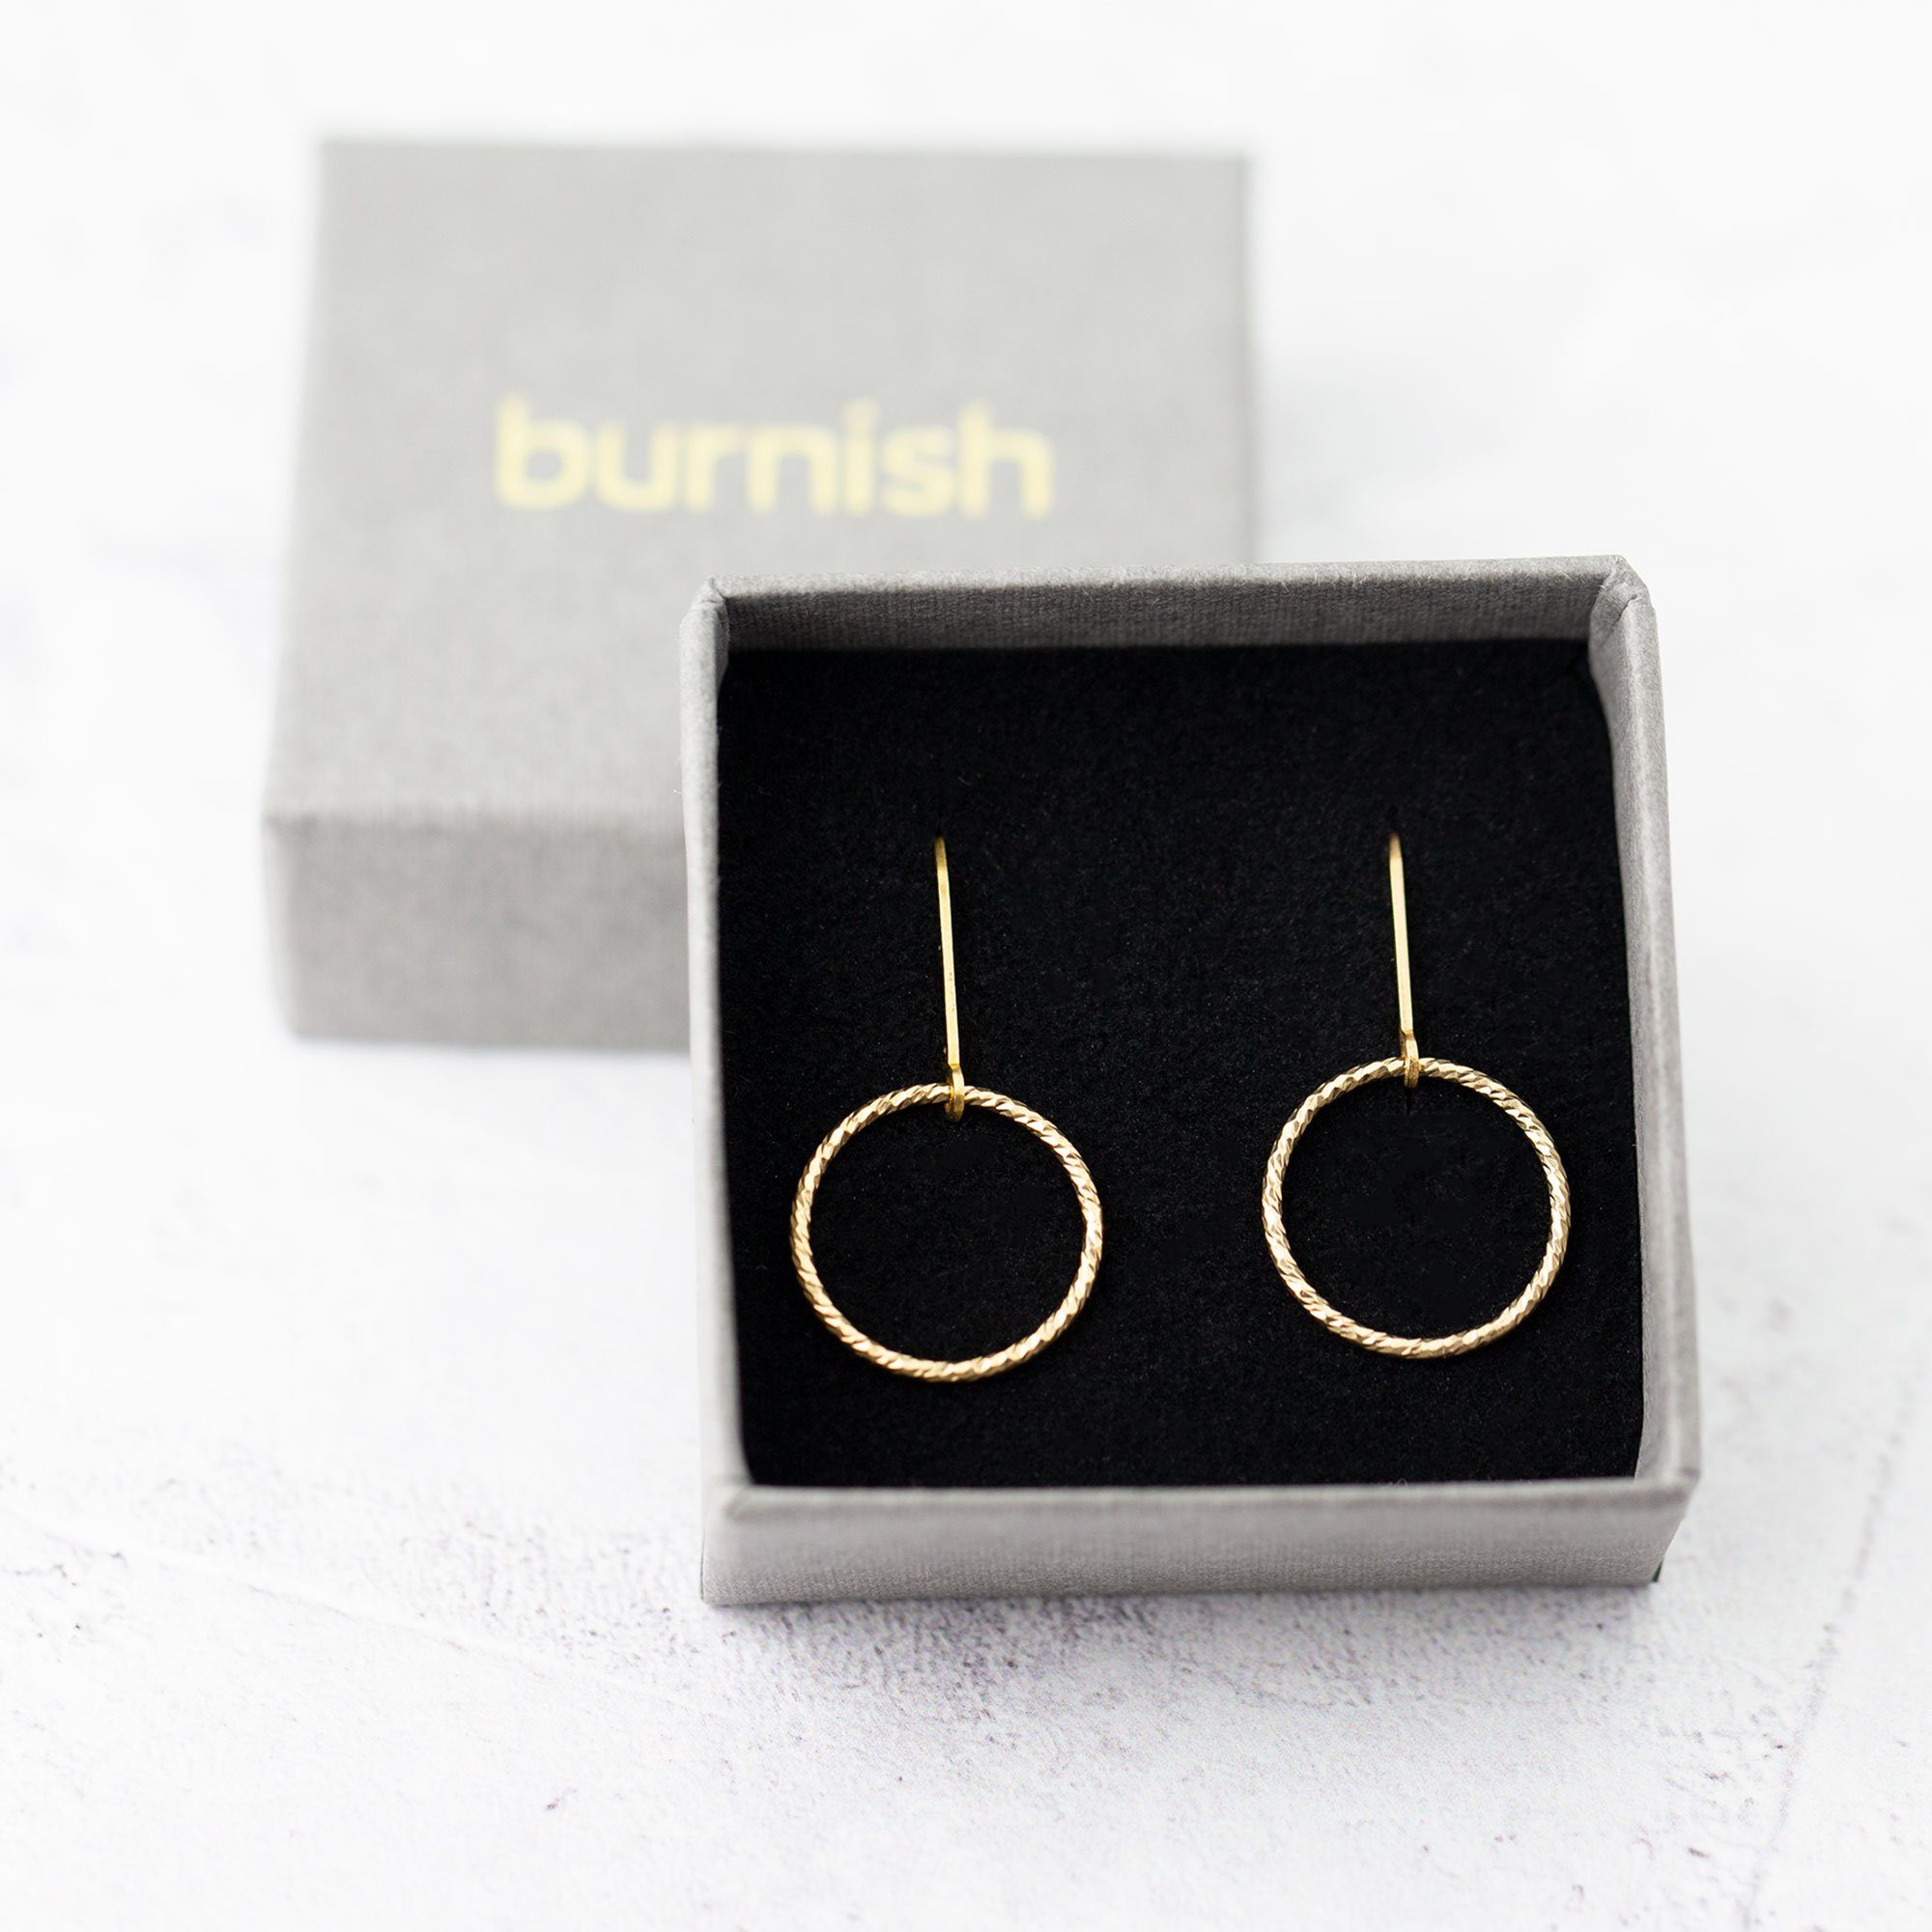 Sparkle Gold Circle Lever-back Earrings - Handmade Jewelry by Burnish